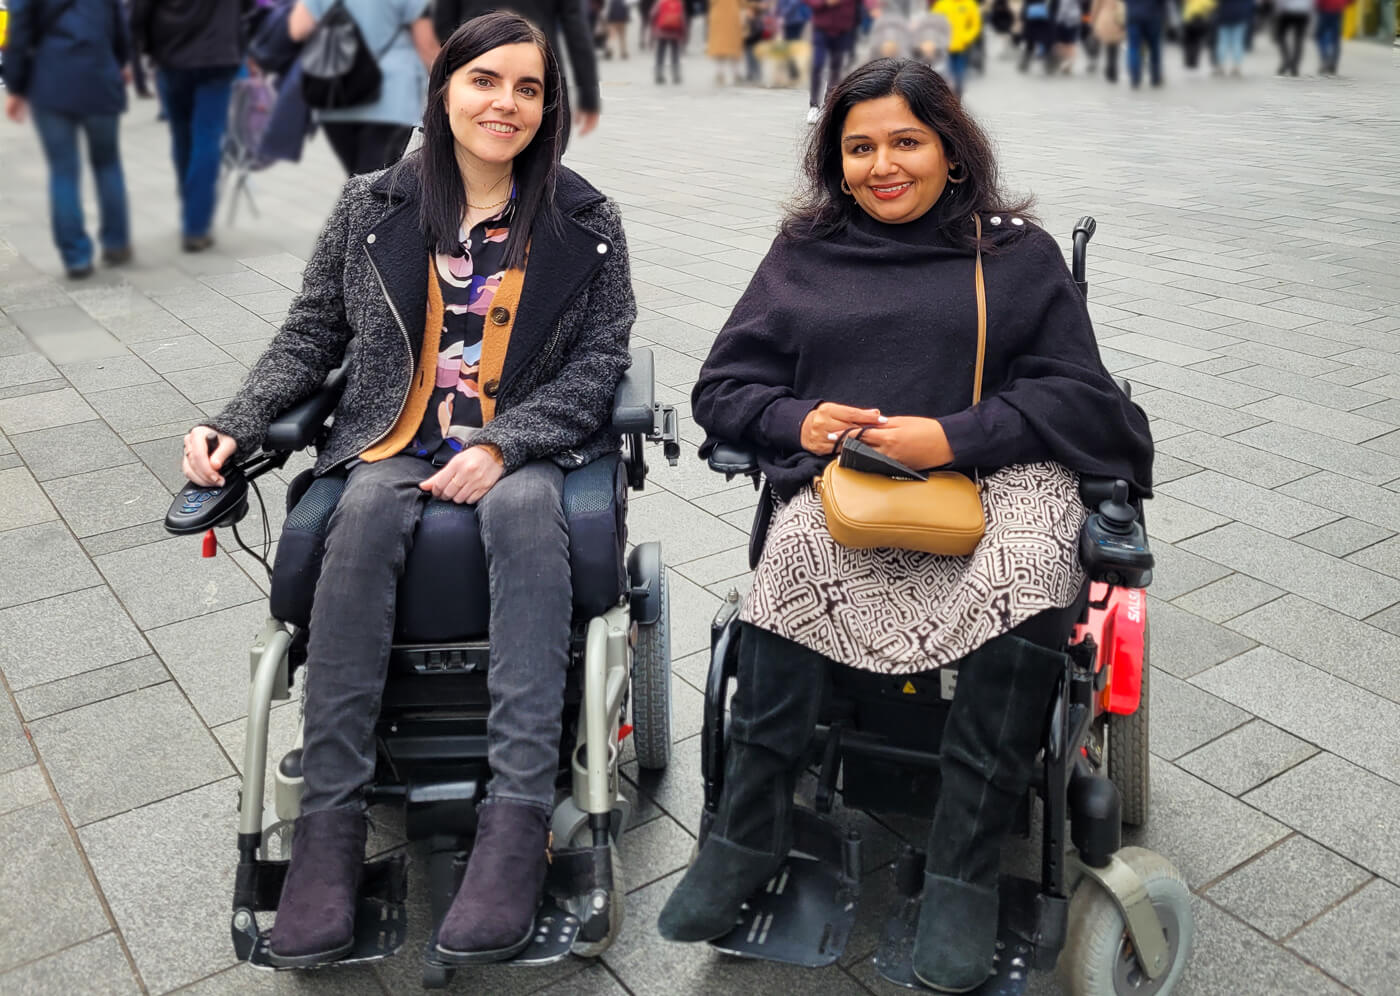 Emma and Tanvi are female power wheelchair users. They are sitting beside each other in a London city centre street. They both have dark hair and smiling at the camera.